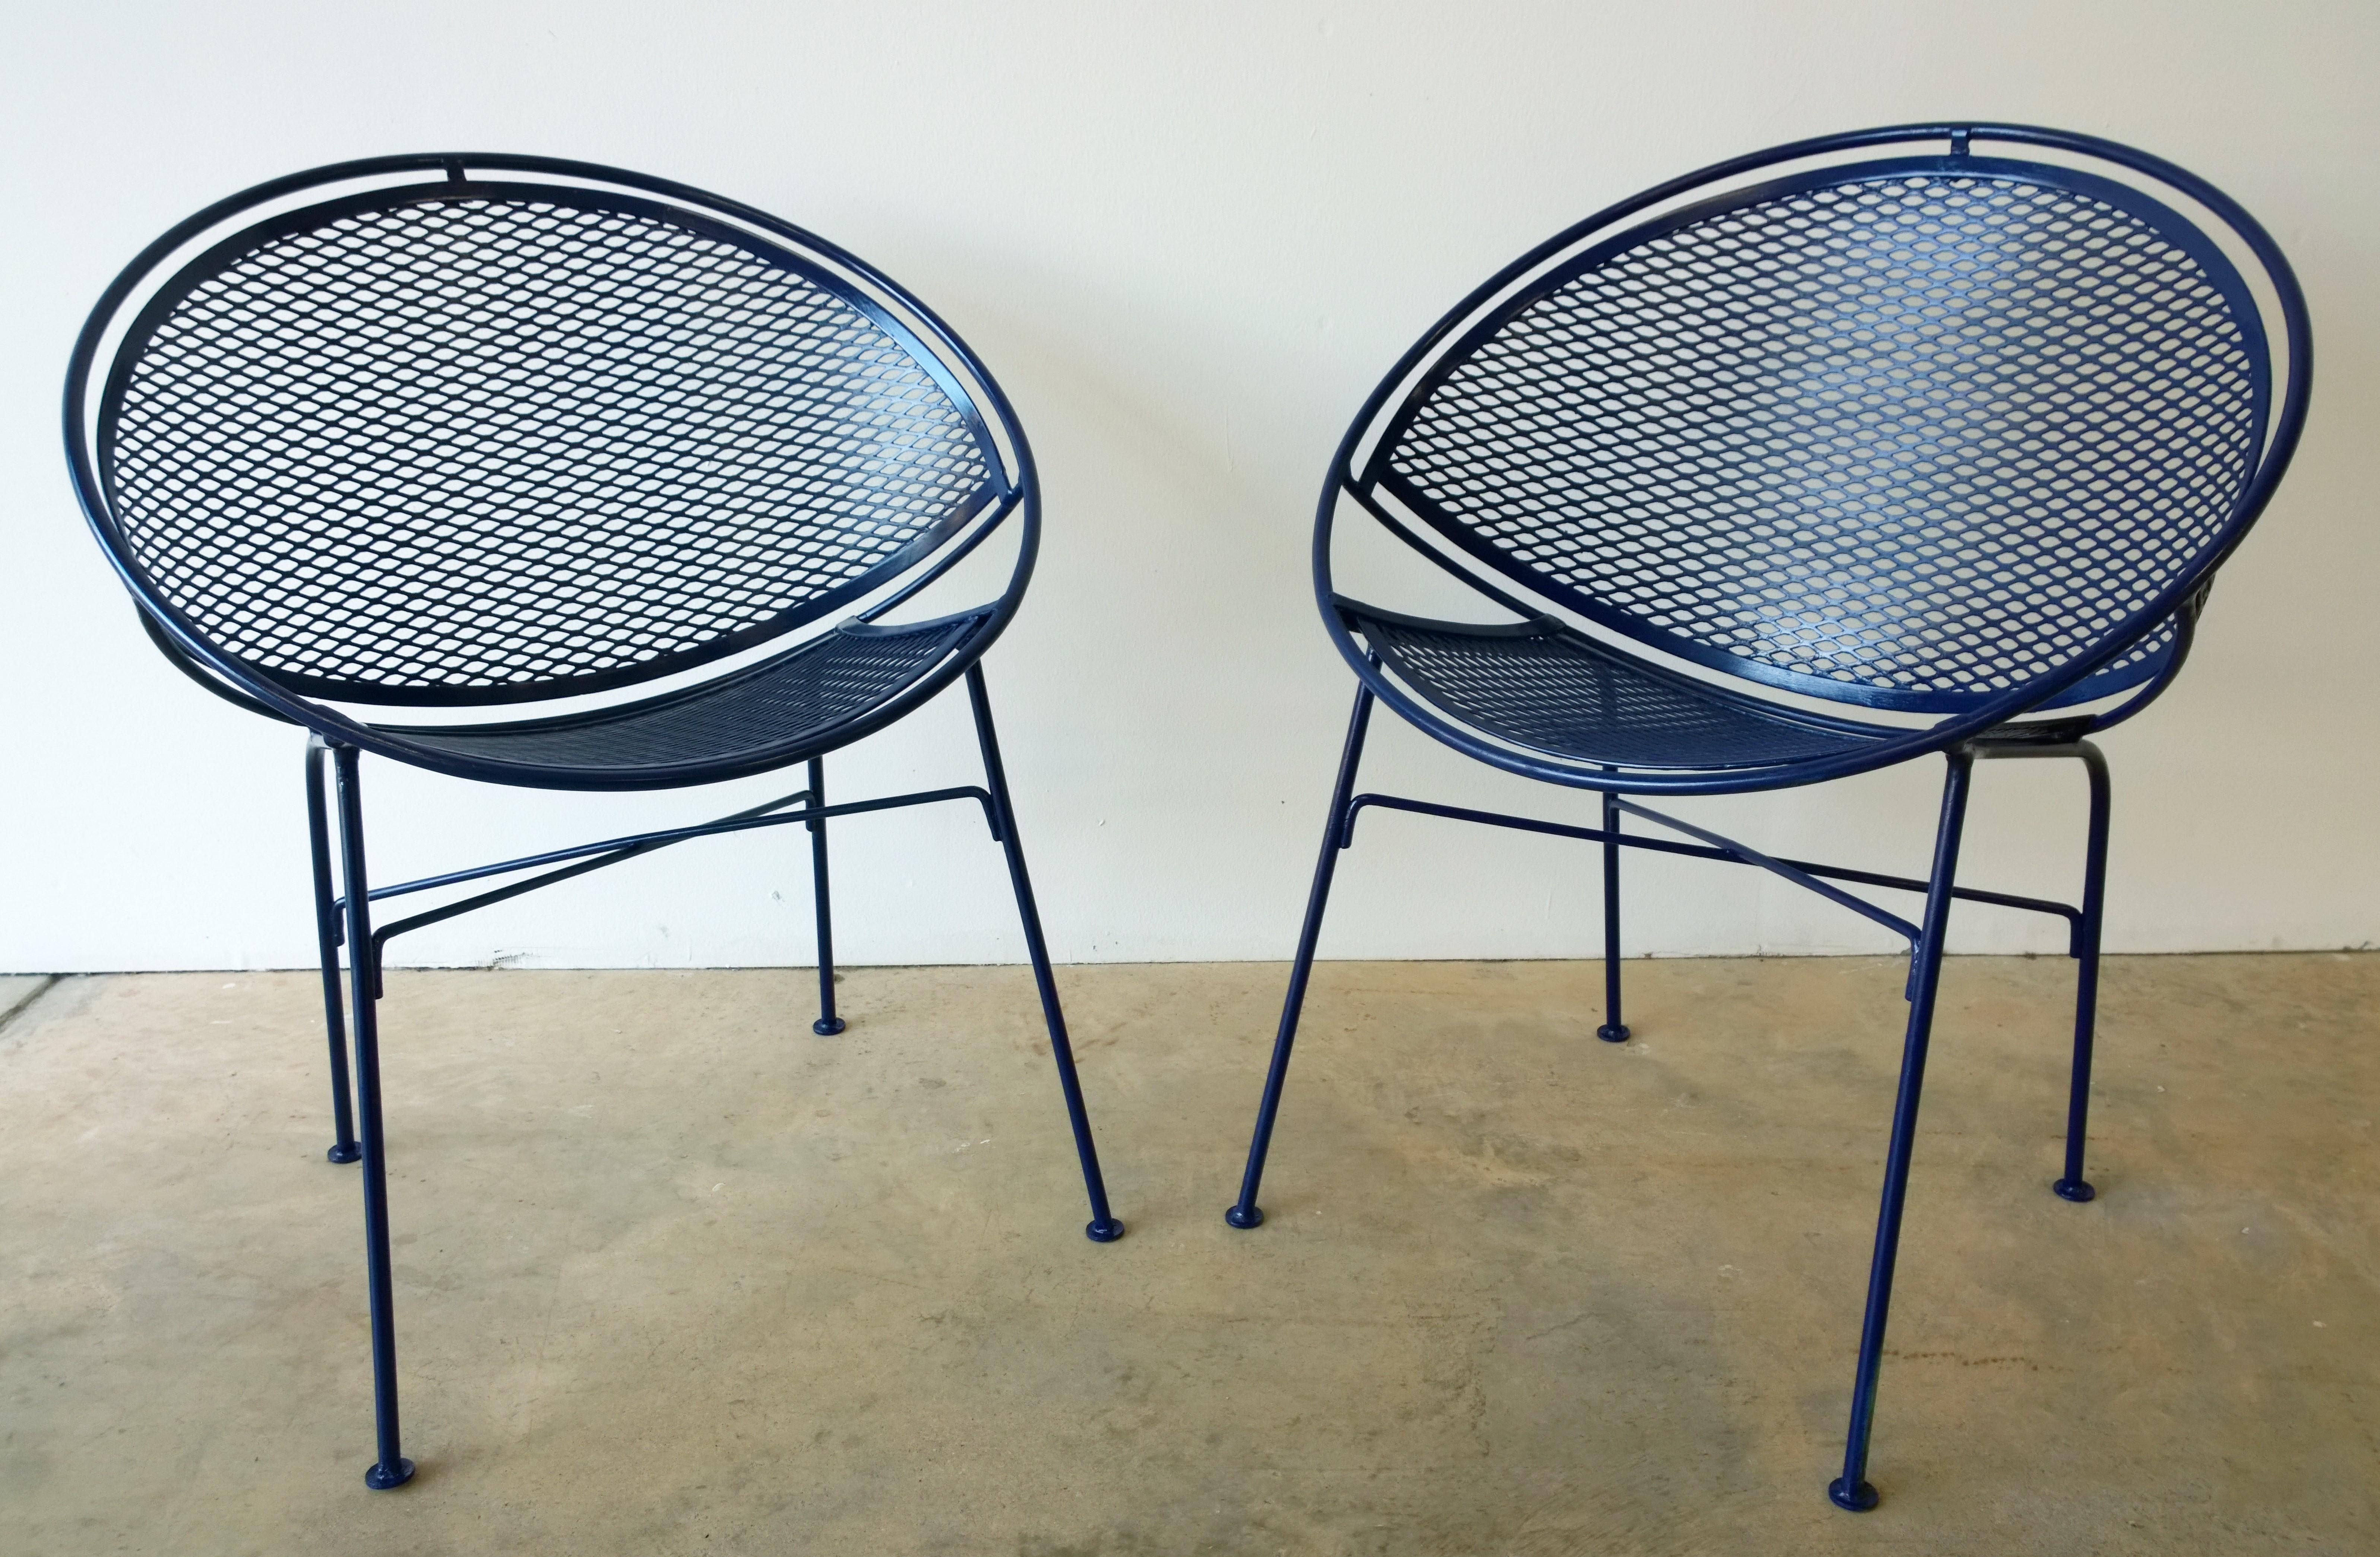 Offered is a set of two John Salterini wrought iron Radar patio / garden chairs newly enameled in Classic blue. This set of Salterini Radar Patio chairs are rare and hard to find. This set would be perfect for a front porch, around the pool, sitting